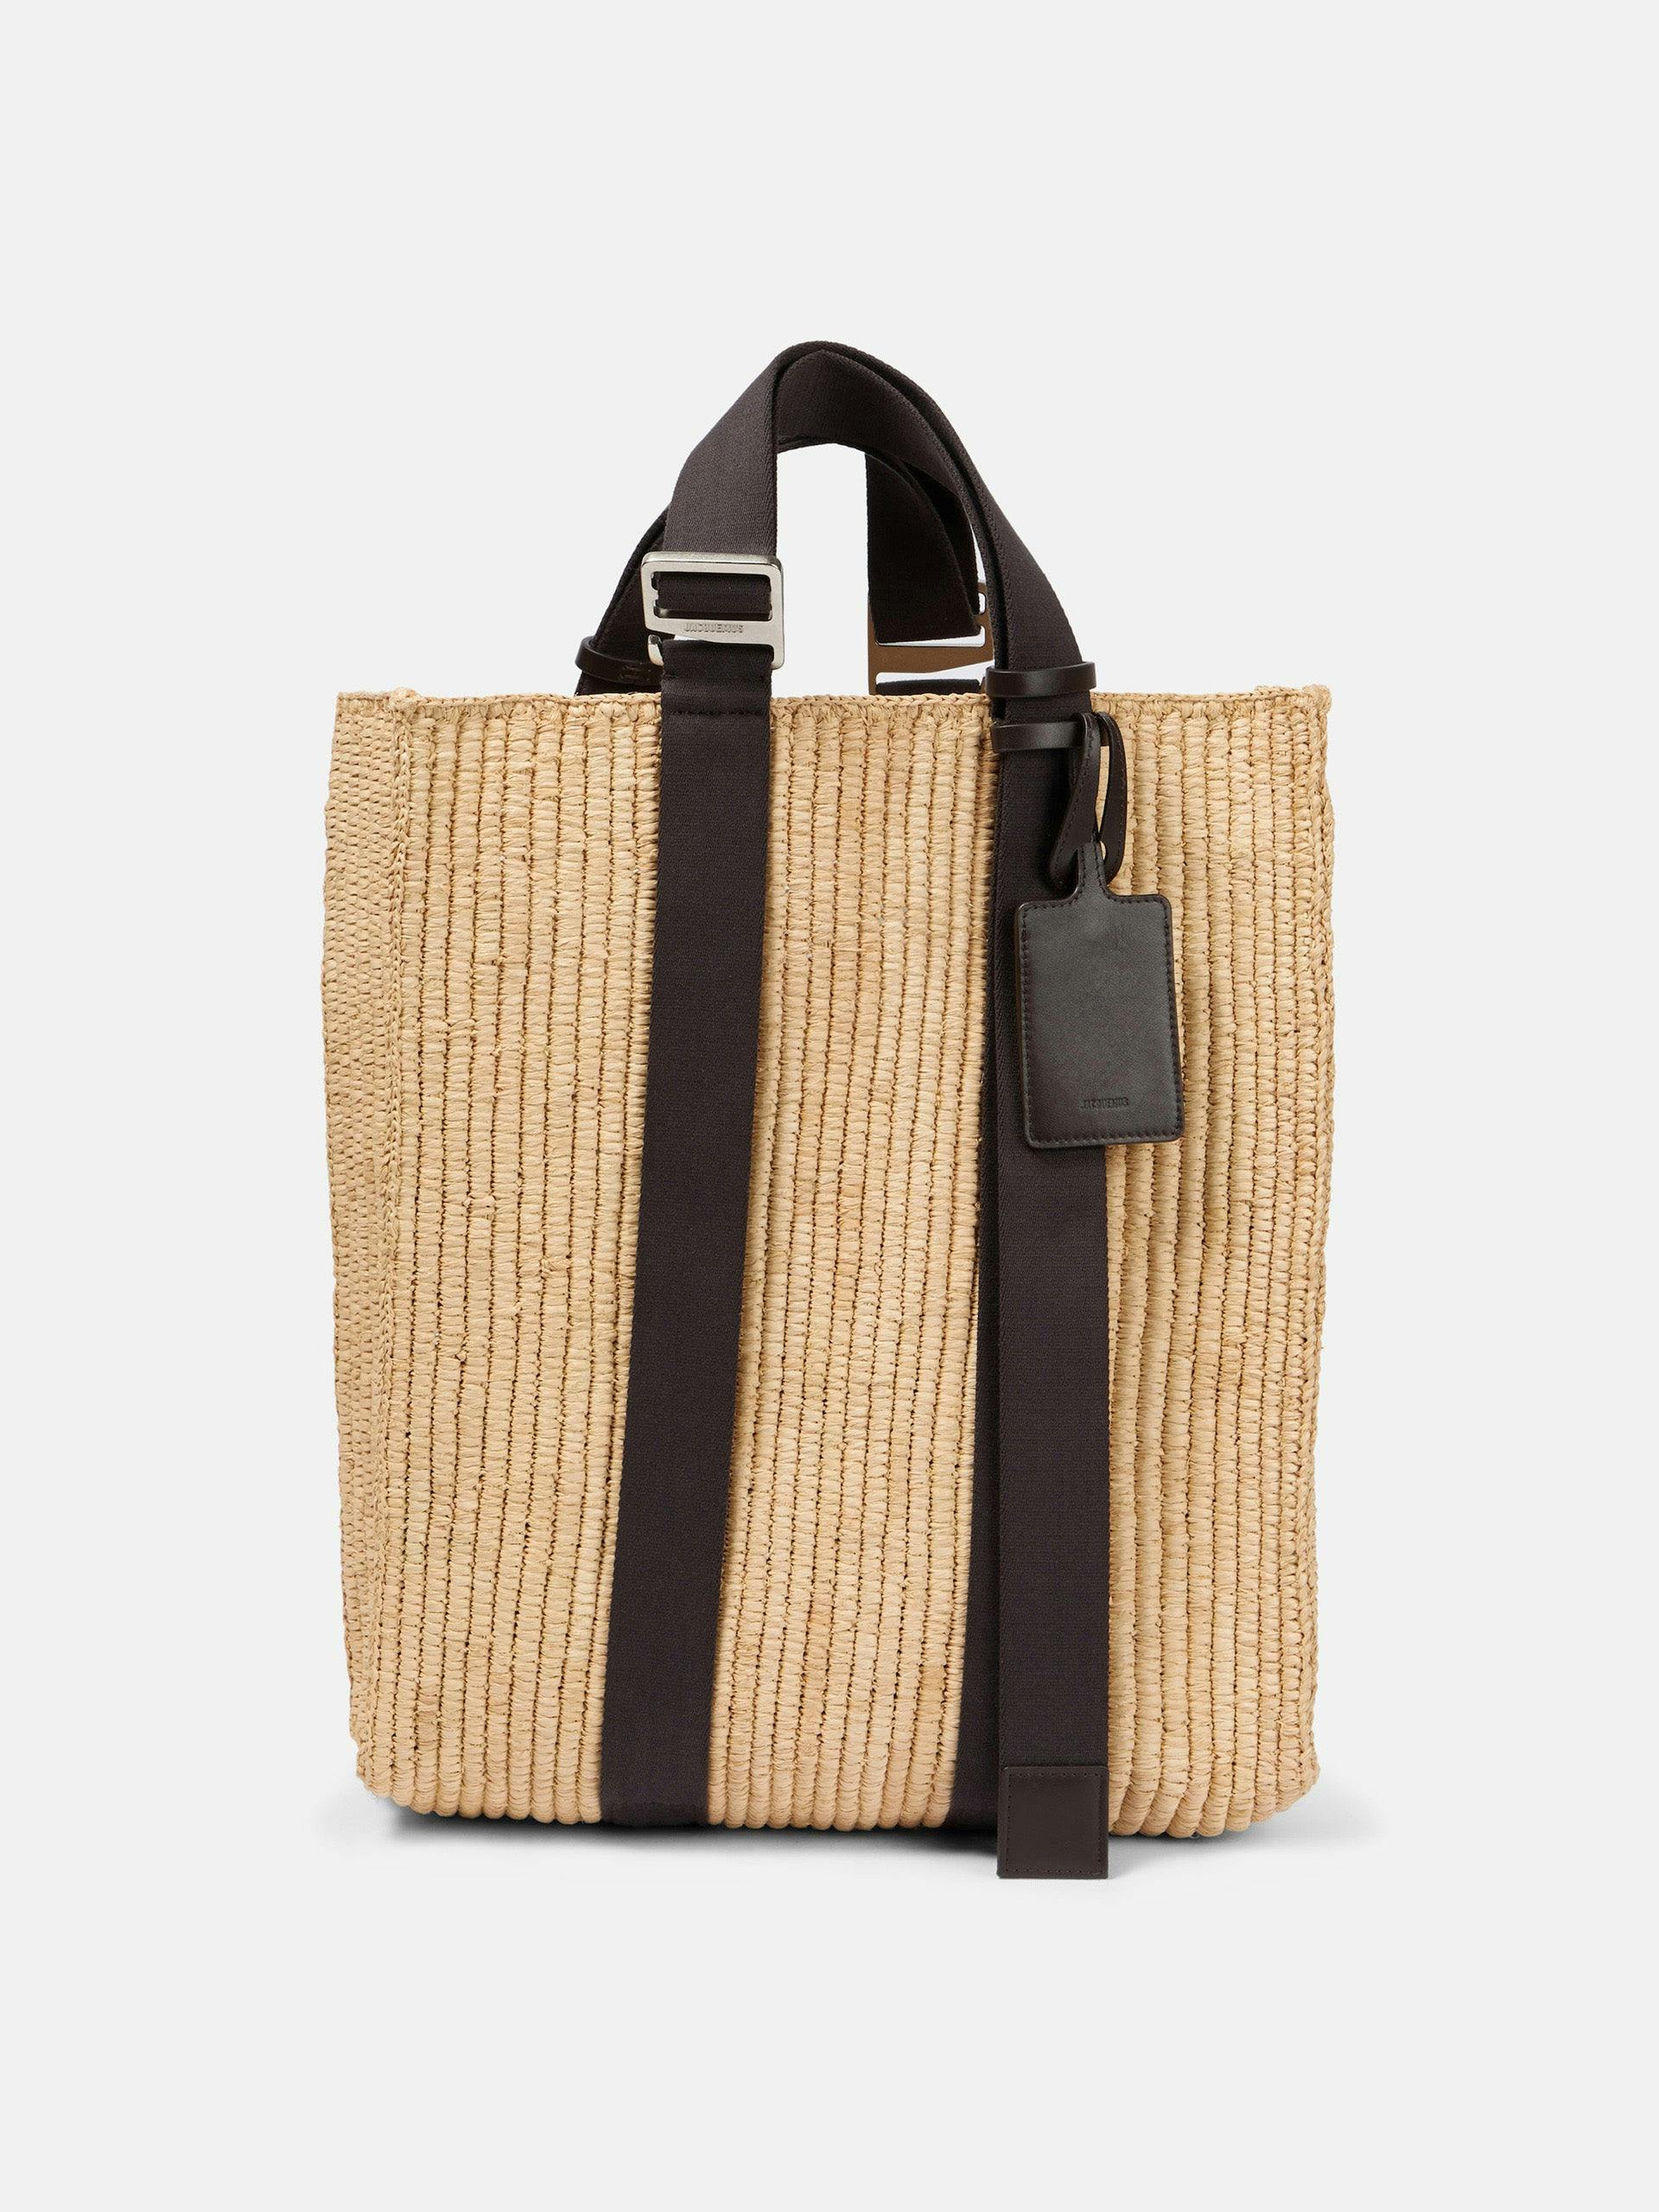 Woven raffia tote bag with leather trims